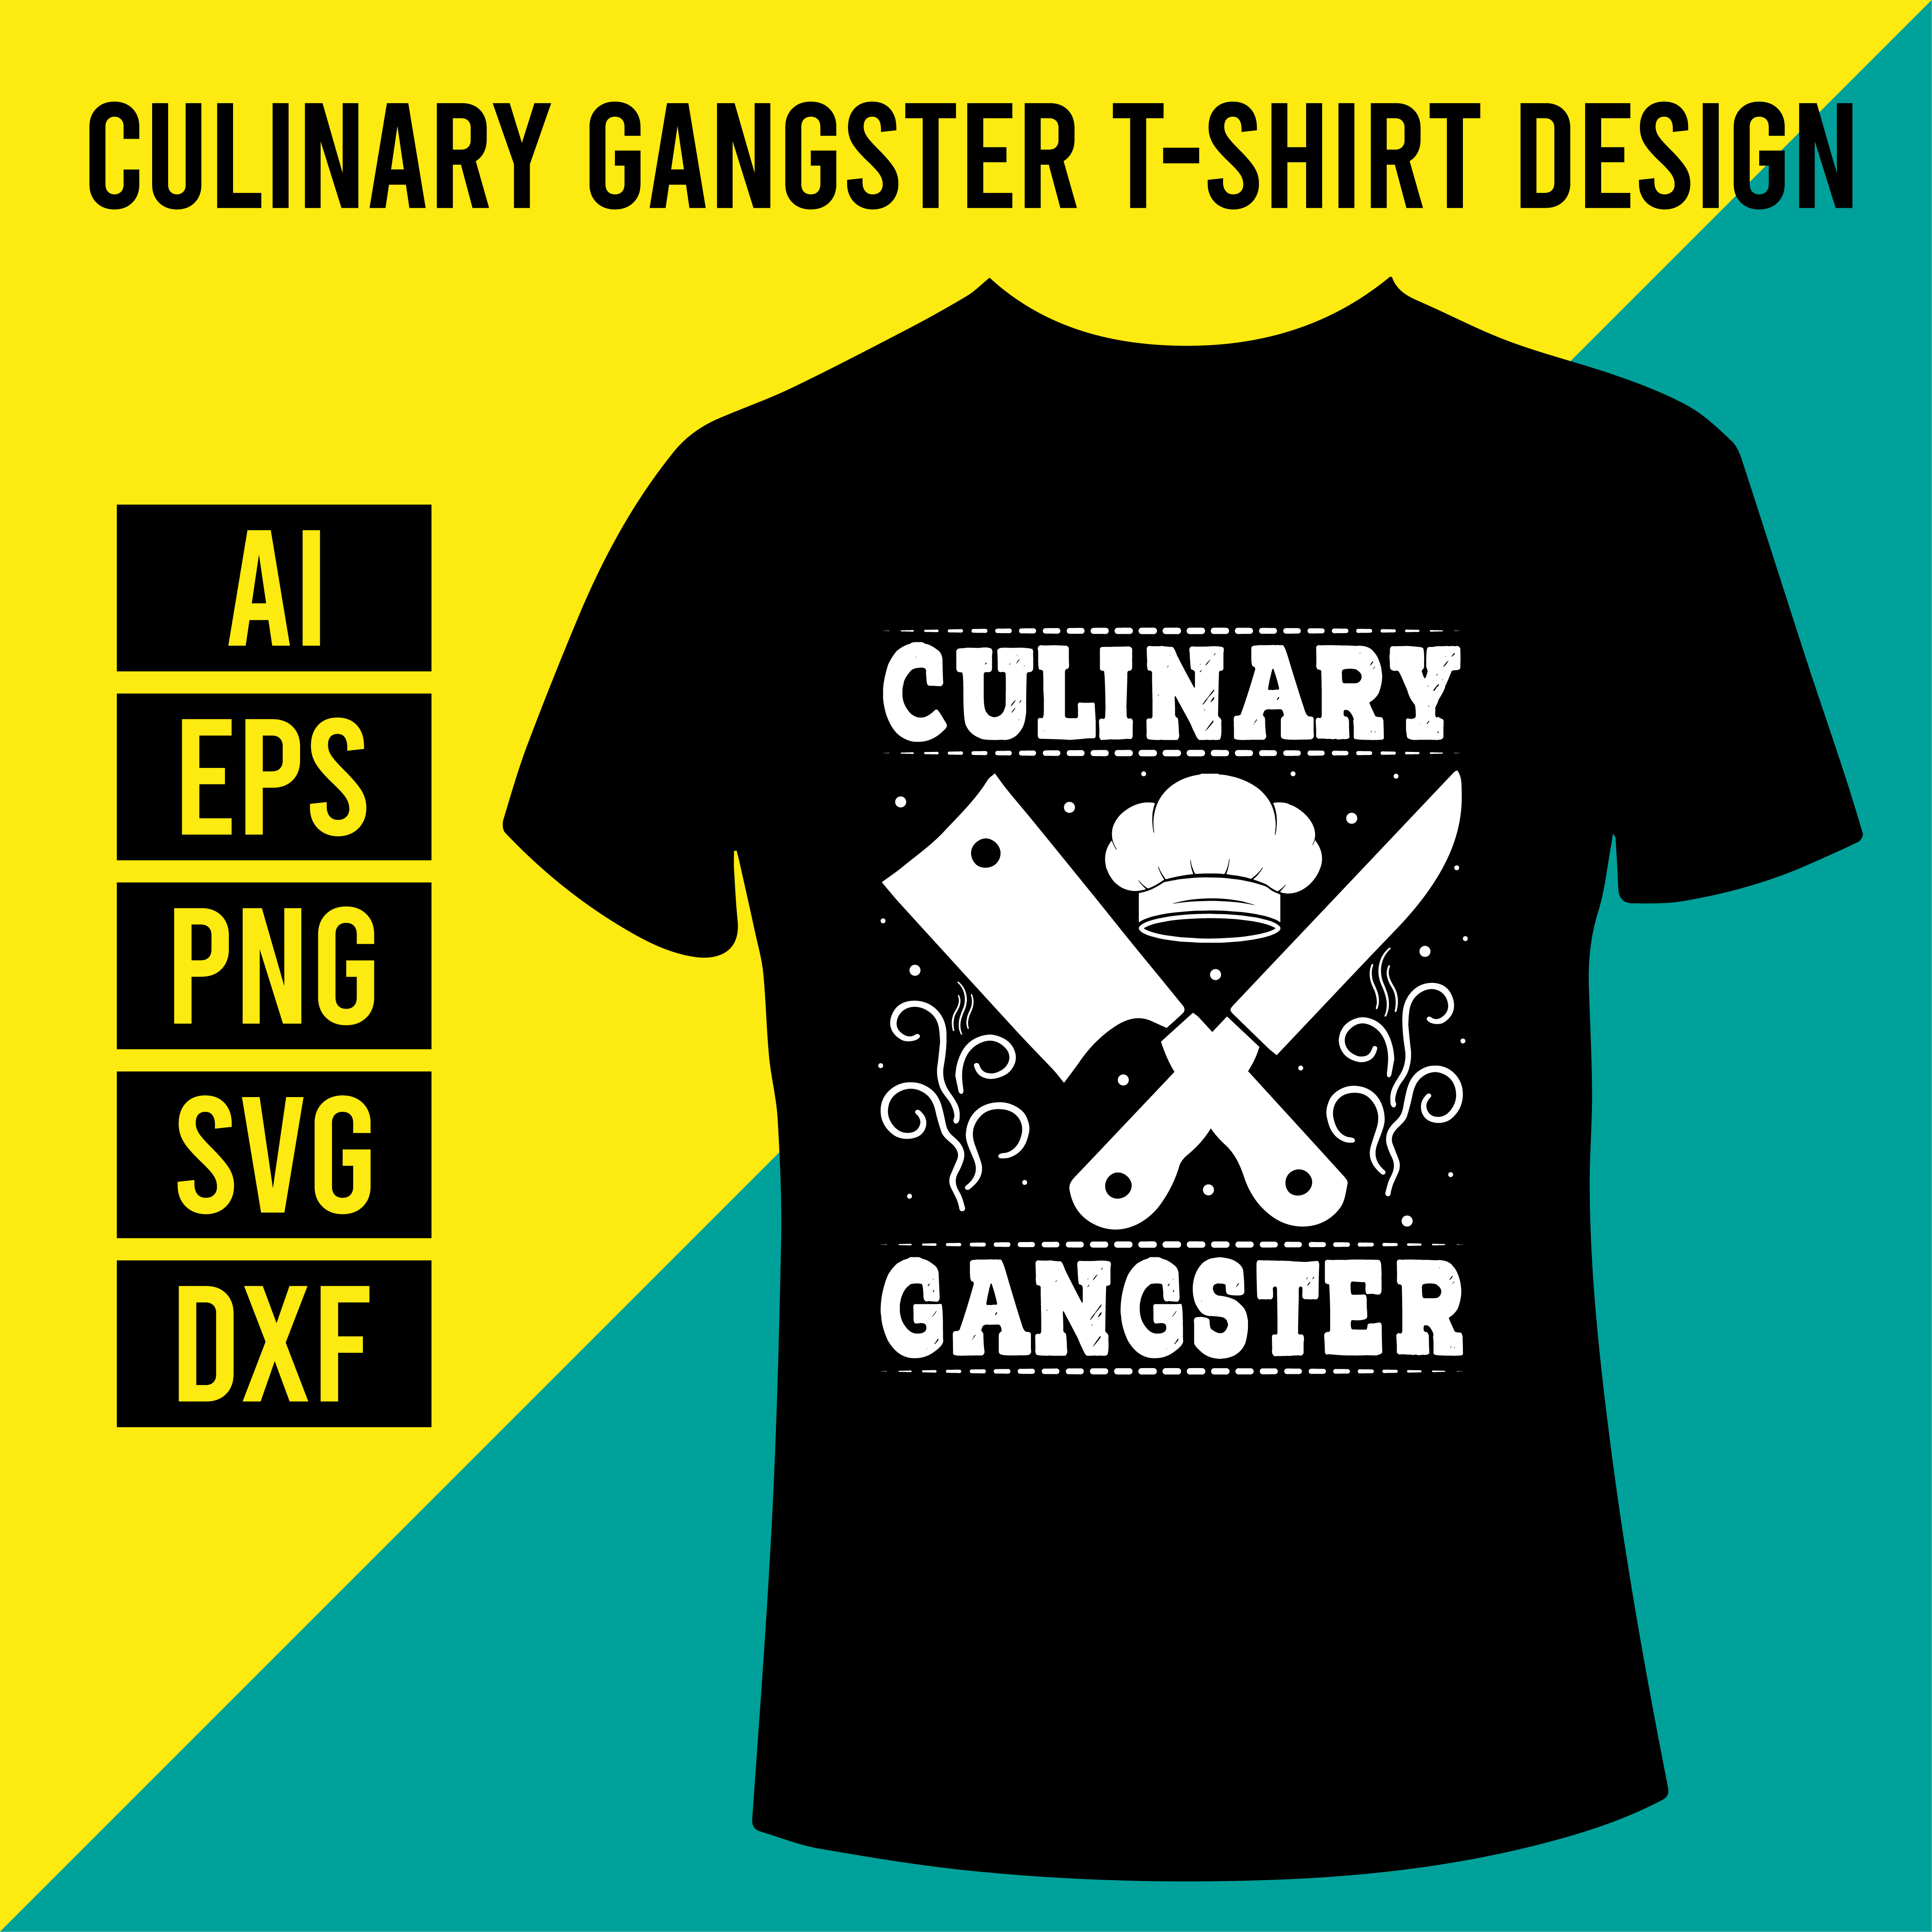 Culinary Gangster T-Shirt Design cover image.